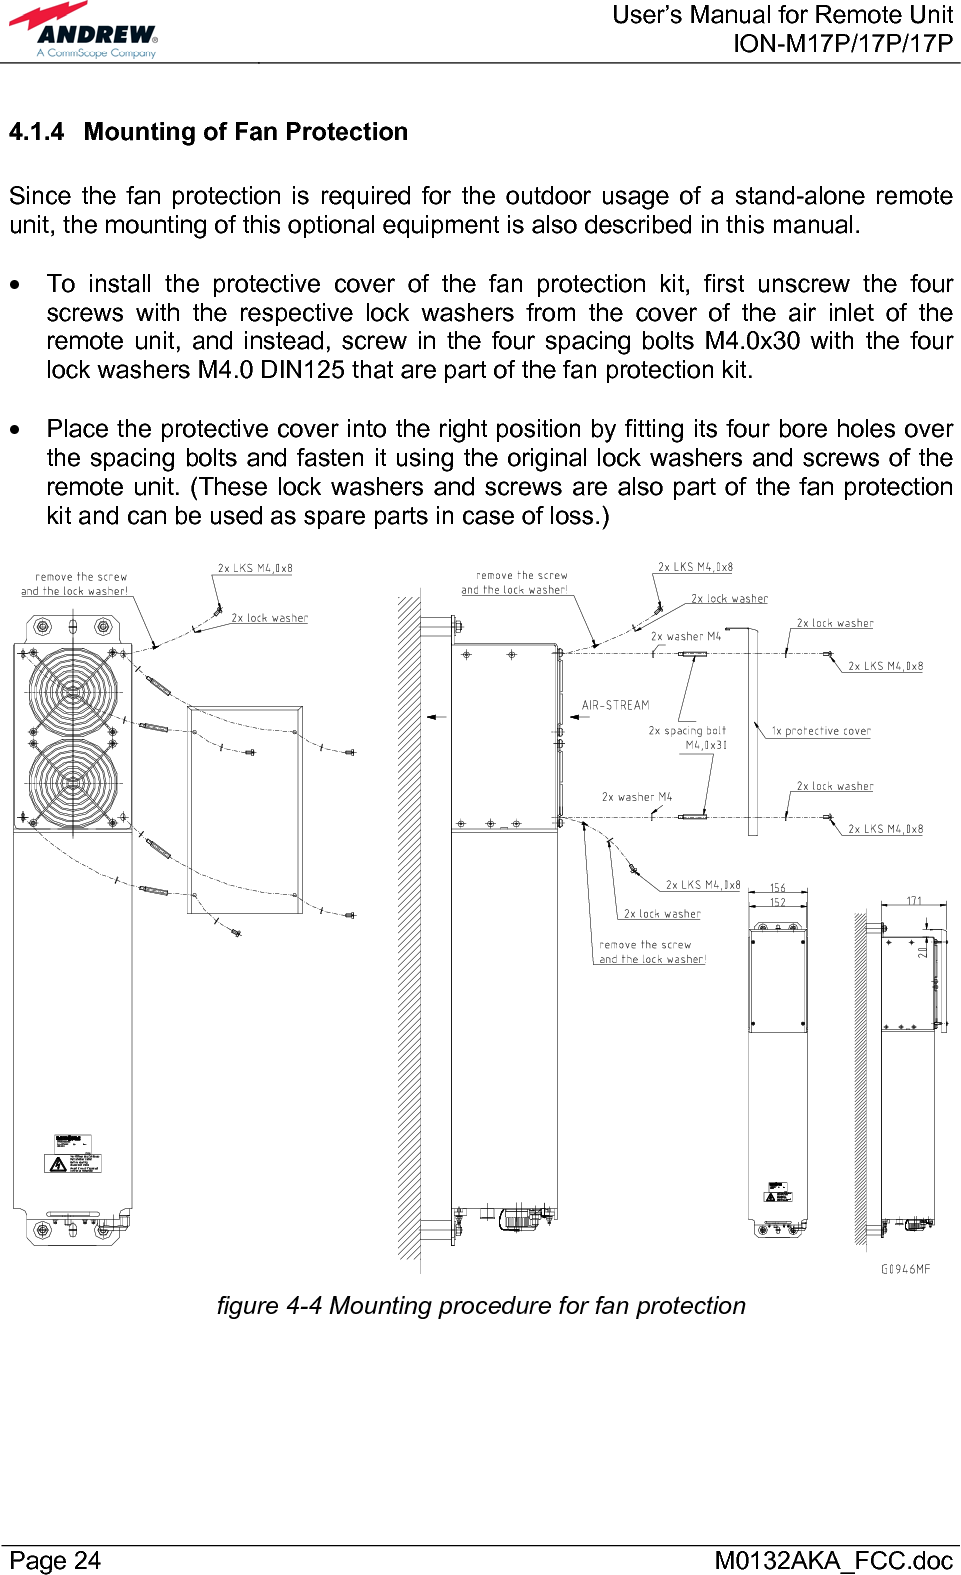  User’s Manual for Remote UnitION-M17P/17P/17P Page 24      M0132AKA_FCC.doc 4.1.4 Mounting of Fan Protection  Since the fan protection is required for the outdoor usage of a stand-alone remote unit, the mounting of this optional equipment is also described in this manual.  •  To install the protective cover of the fan protection kit, first unscrew the four screws with the respective lock washers from the cover of the air inlet of the remote unit, and instead, screw in the four spacing bolts M4.0x30 with the four lock washers M4.0 DIN125 that are part of the fan protection kit.  •  Place the protective cover into the right position by fitting its four bore holes over the spacing bolts and fasten it using the original lock washers and screws of the remote unit. (These lock washers and screws are also part of the fan protection kit and can be used as spare parts in case of loss.)   figure 4-4 Mounting procedure for fan protection  